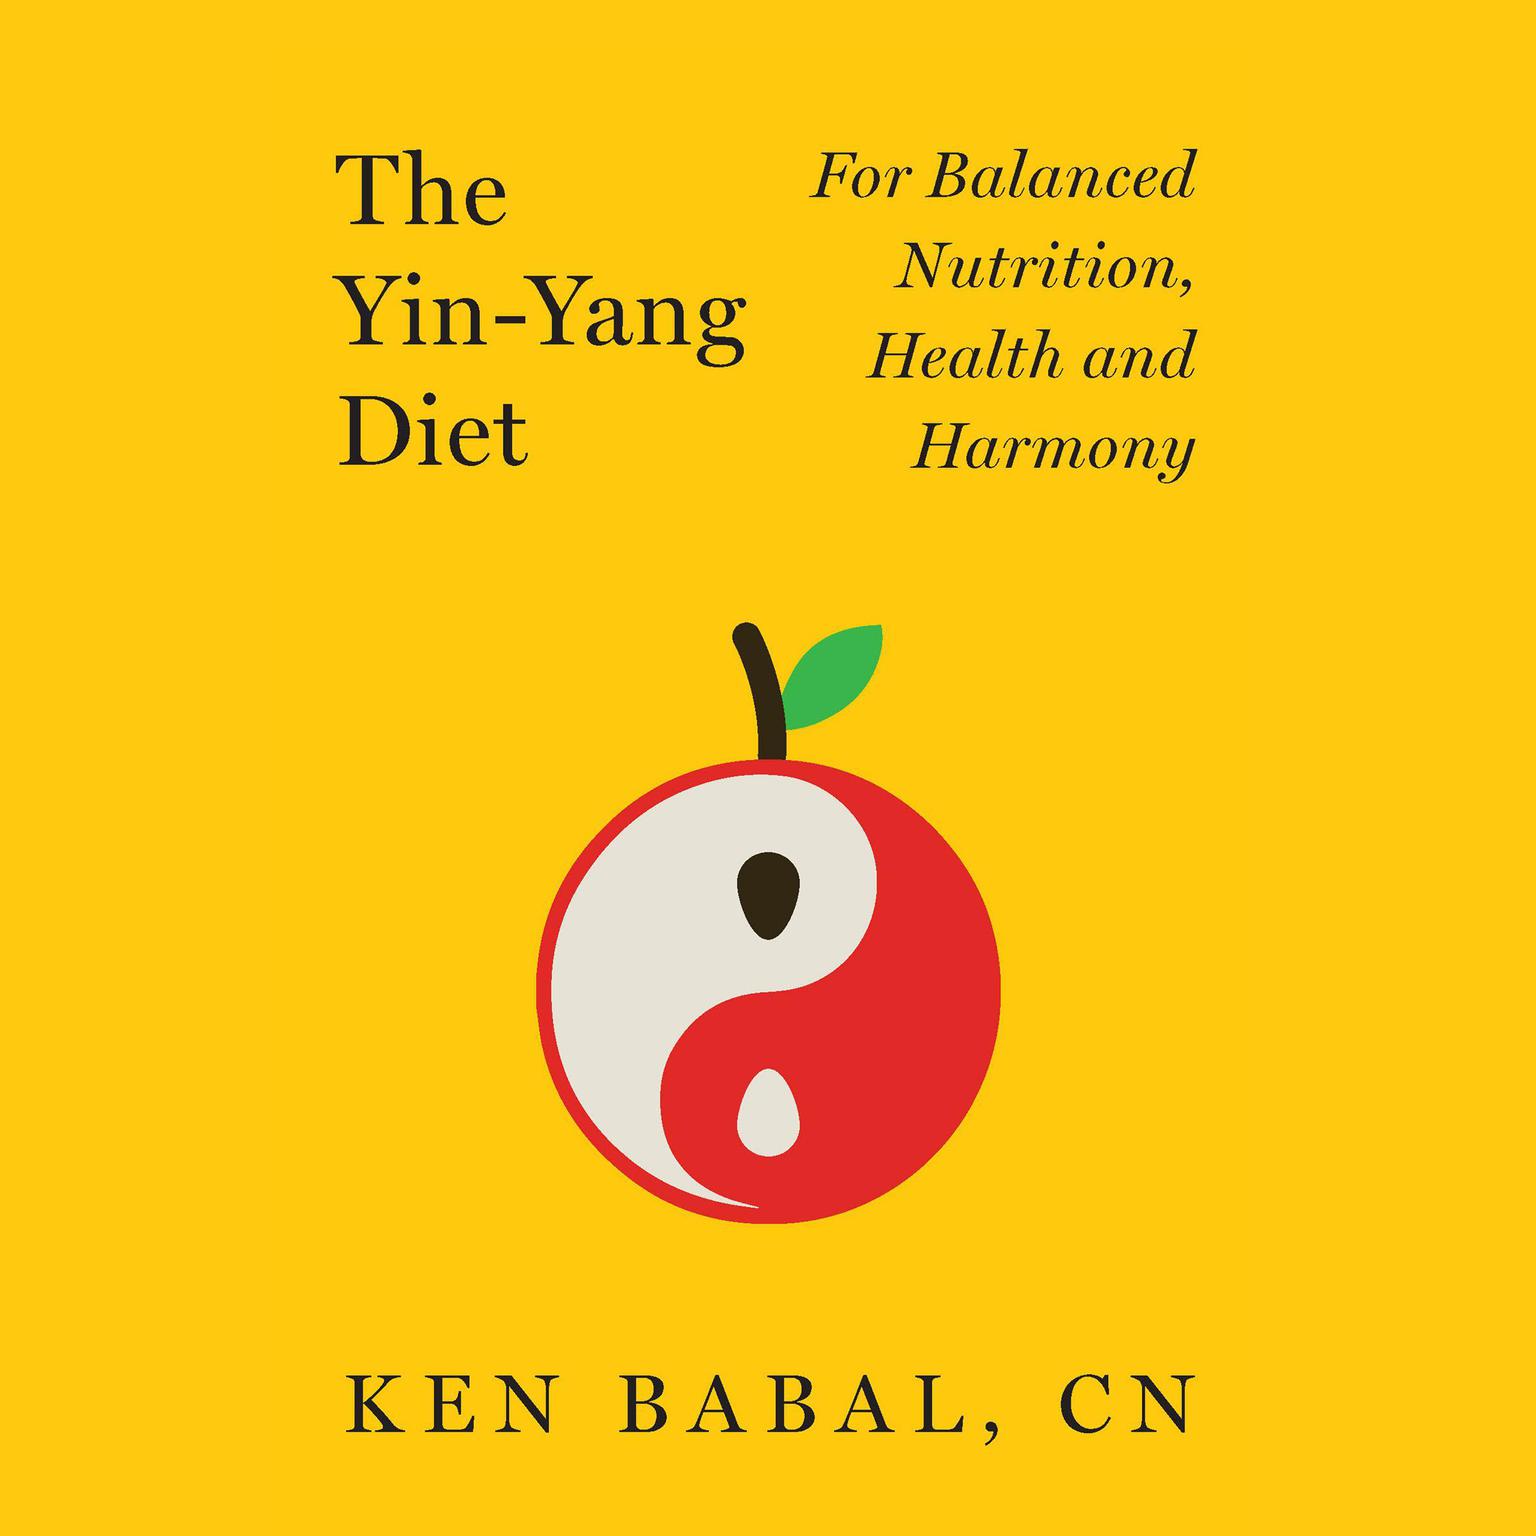 The Yin-Yang Diet: For Balanced Nutrition, Health and Harmony Audiobook, by Ken Babal